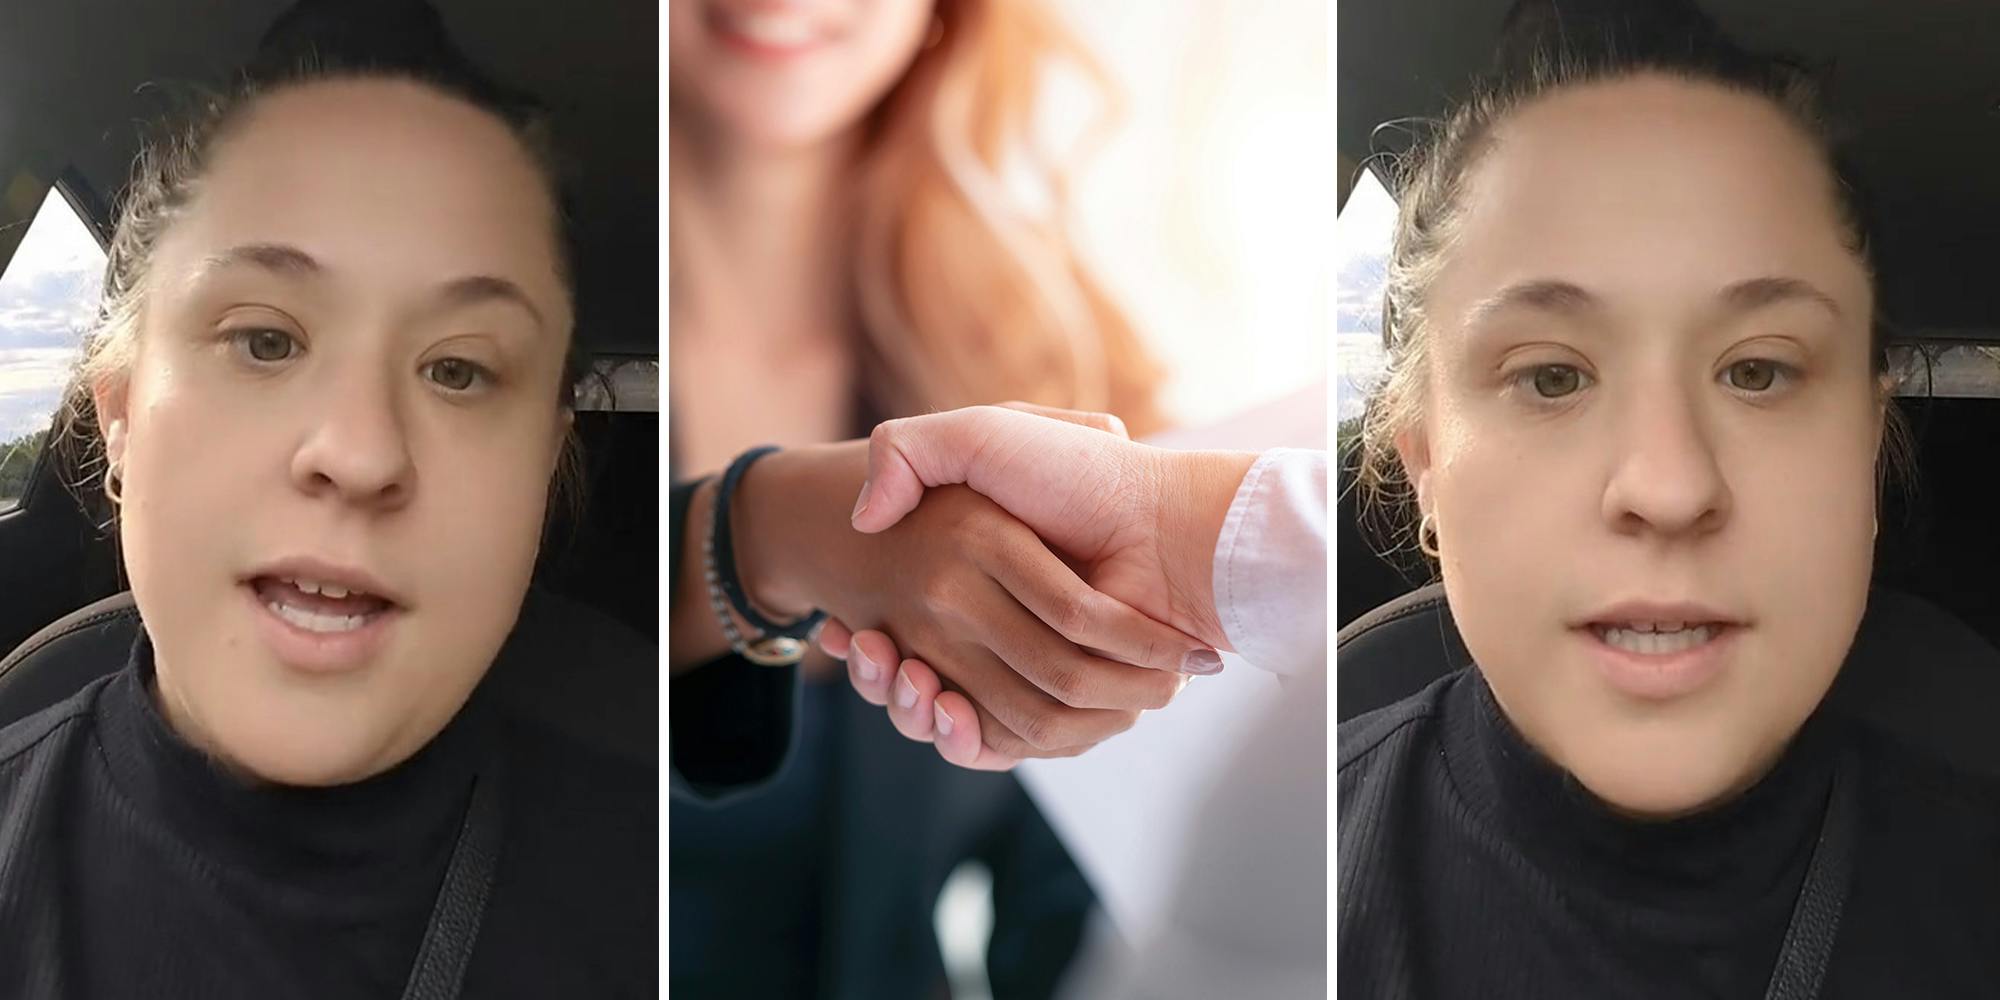 ‘Do you have to ask for consent now to shake somebody’s hand?’: Job seeker says ‘strange’ interview made her turn down job offer